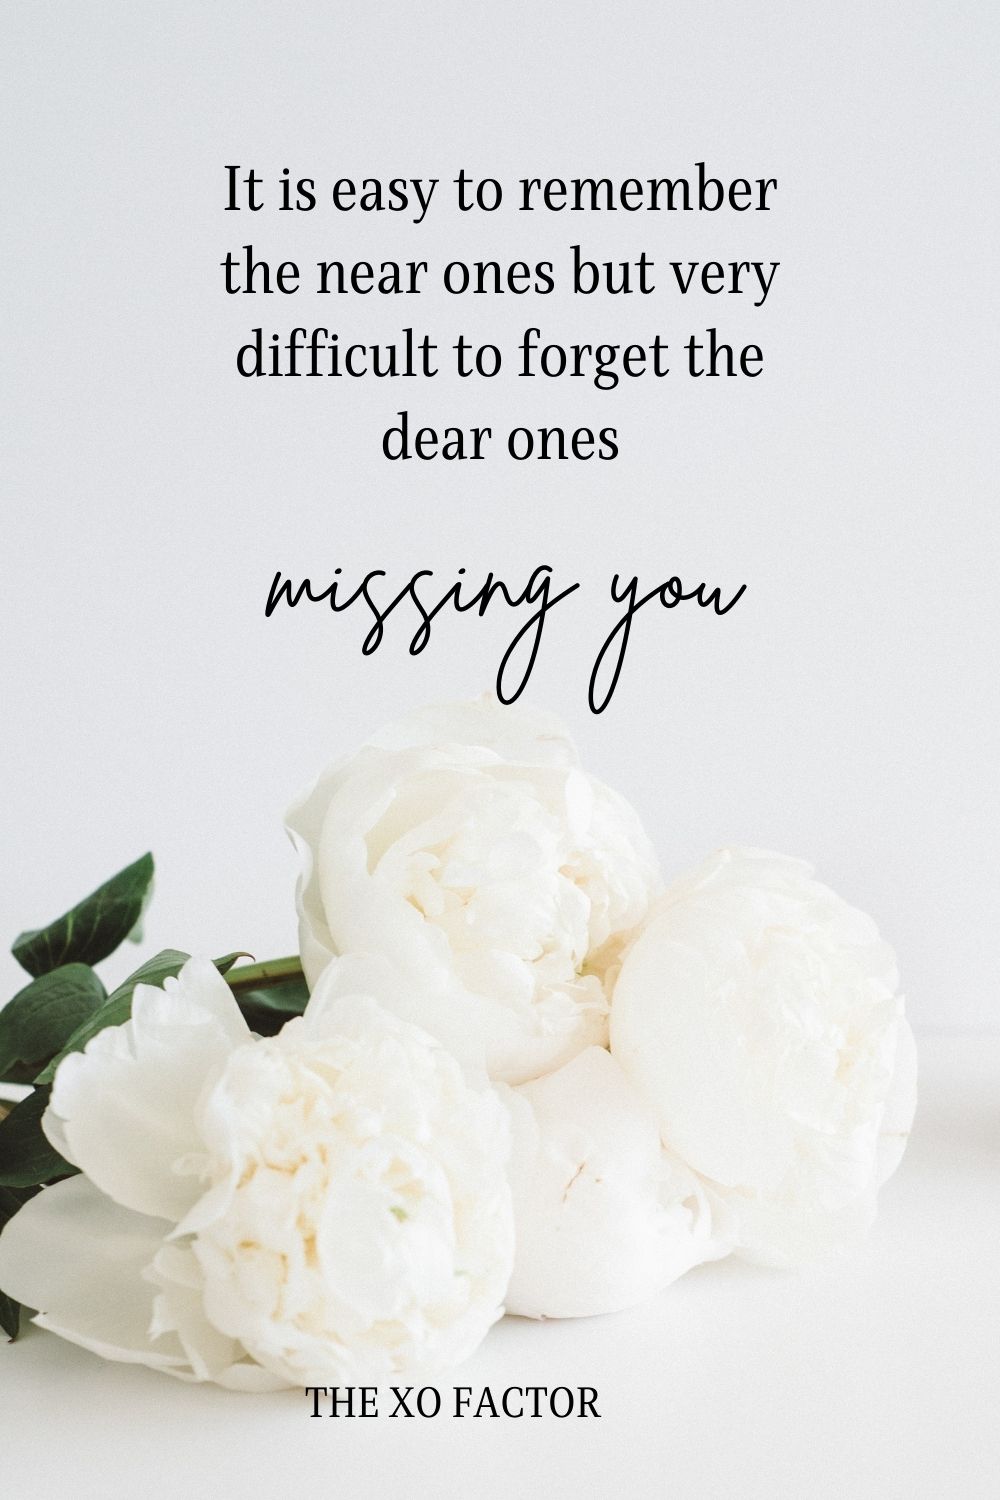 It is easy to remember the near ones but very difficult to forget the dear ones missing you